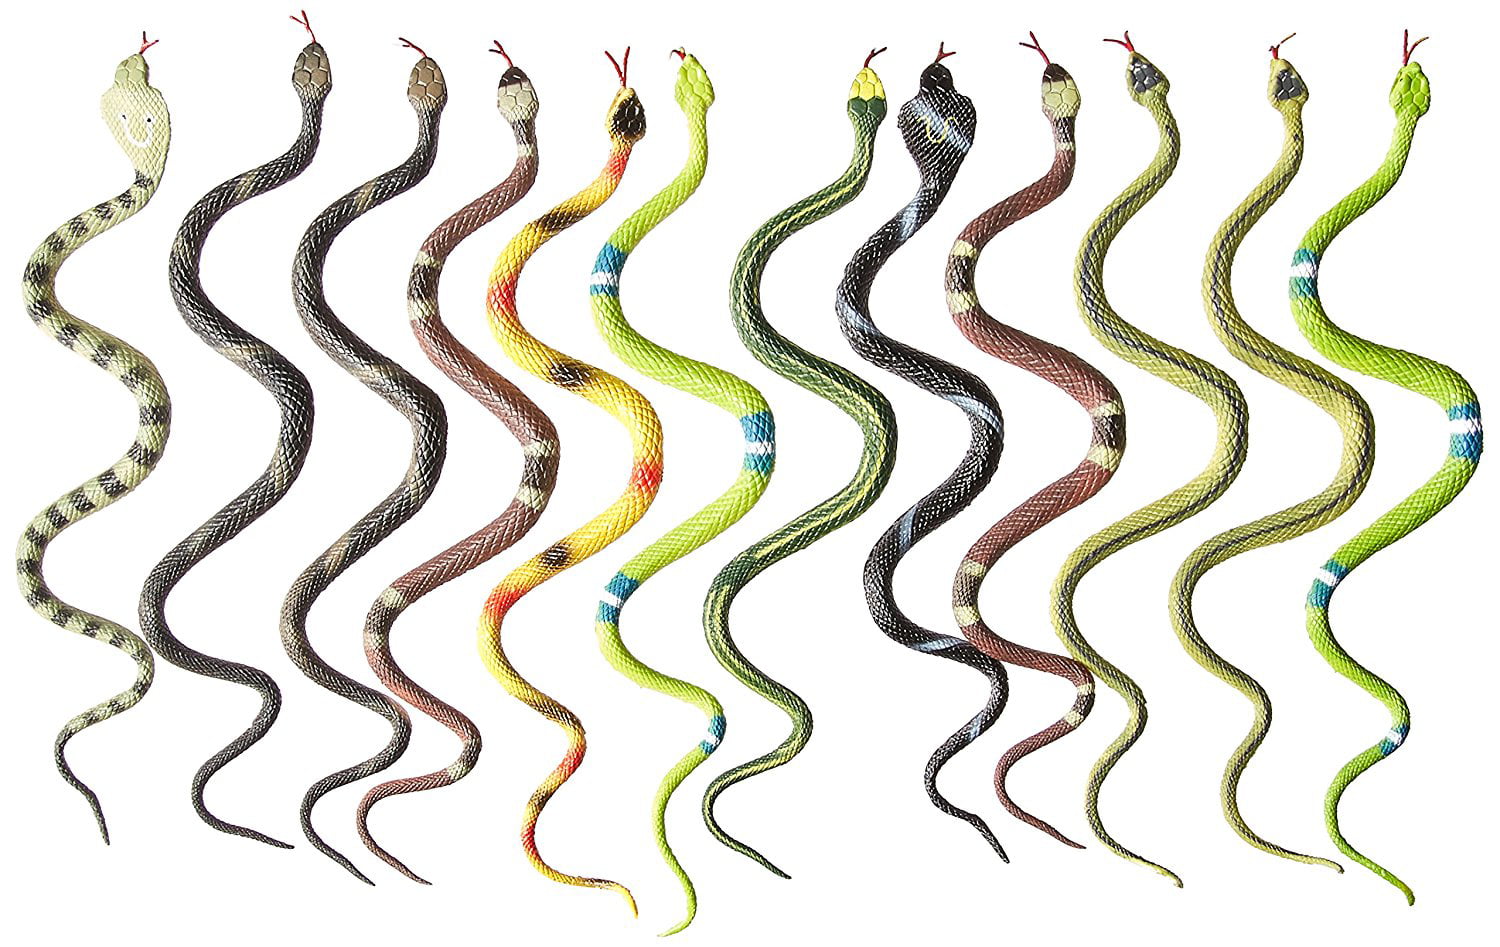 10 RAIN FOREST RUBBER SNAKES 14" REALISTIC WITH SCALES FREE SHIPPING GAG GIFT 